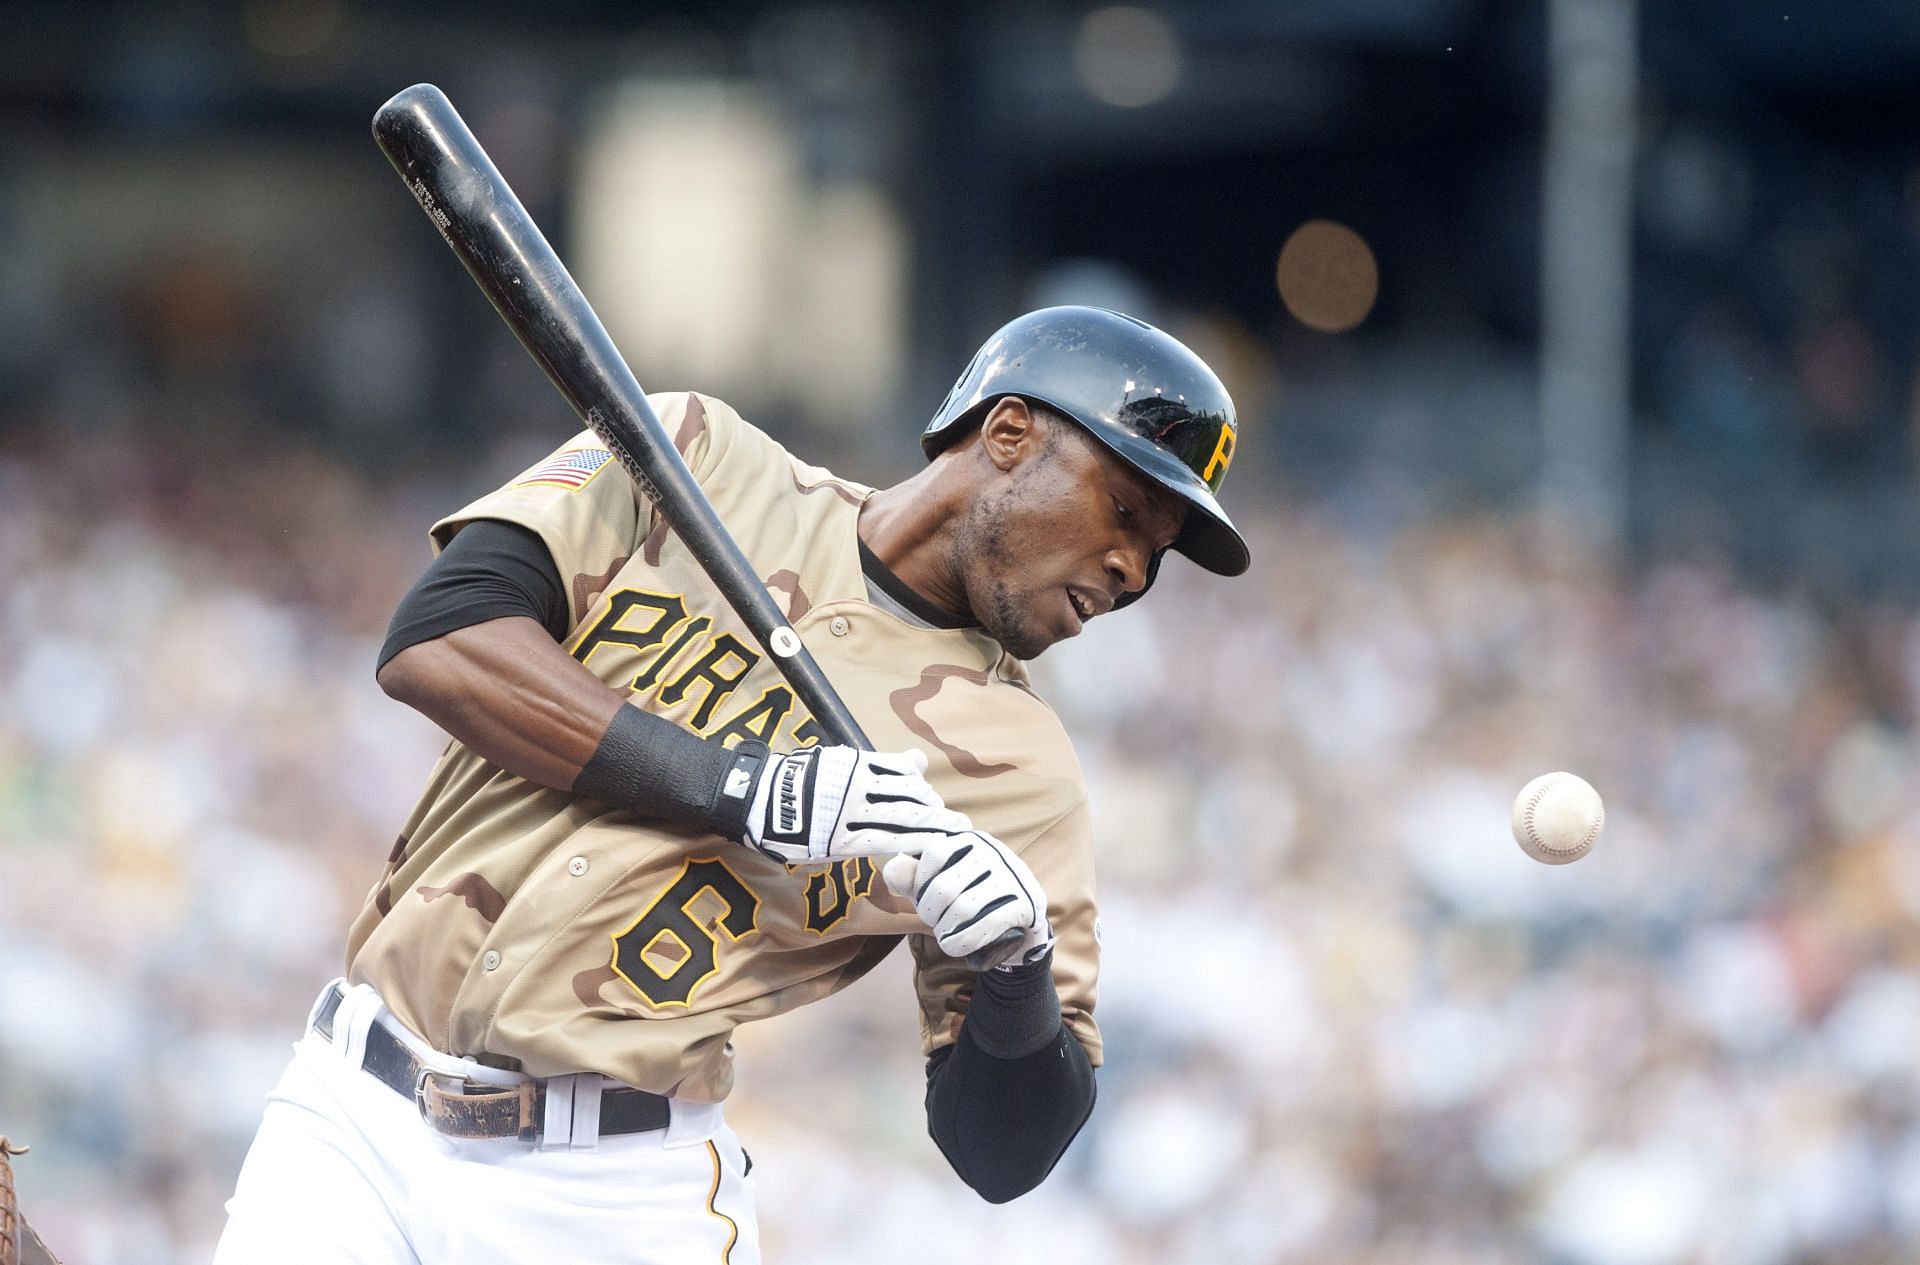 Starling Marte: Starling Marte once apologized for his negligent actions  that led to 80 game suspension in violation of MLB's drug policy